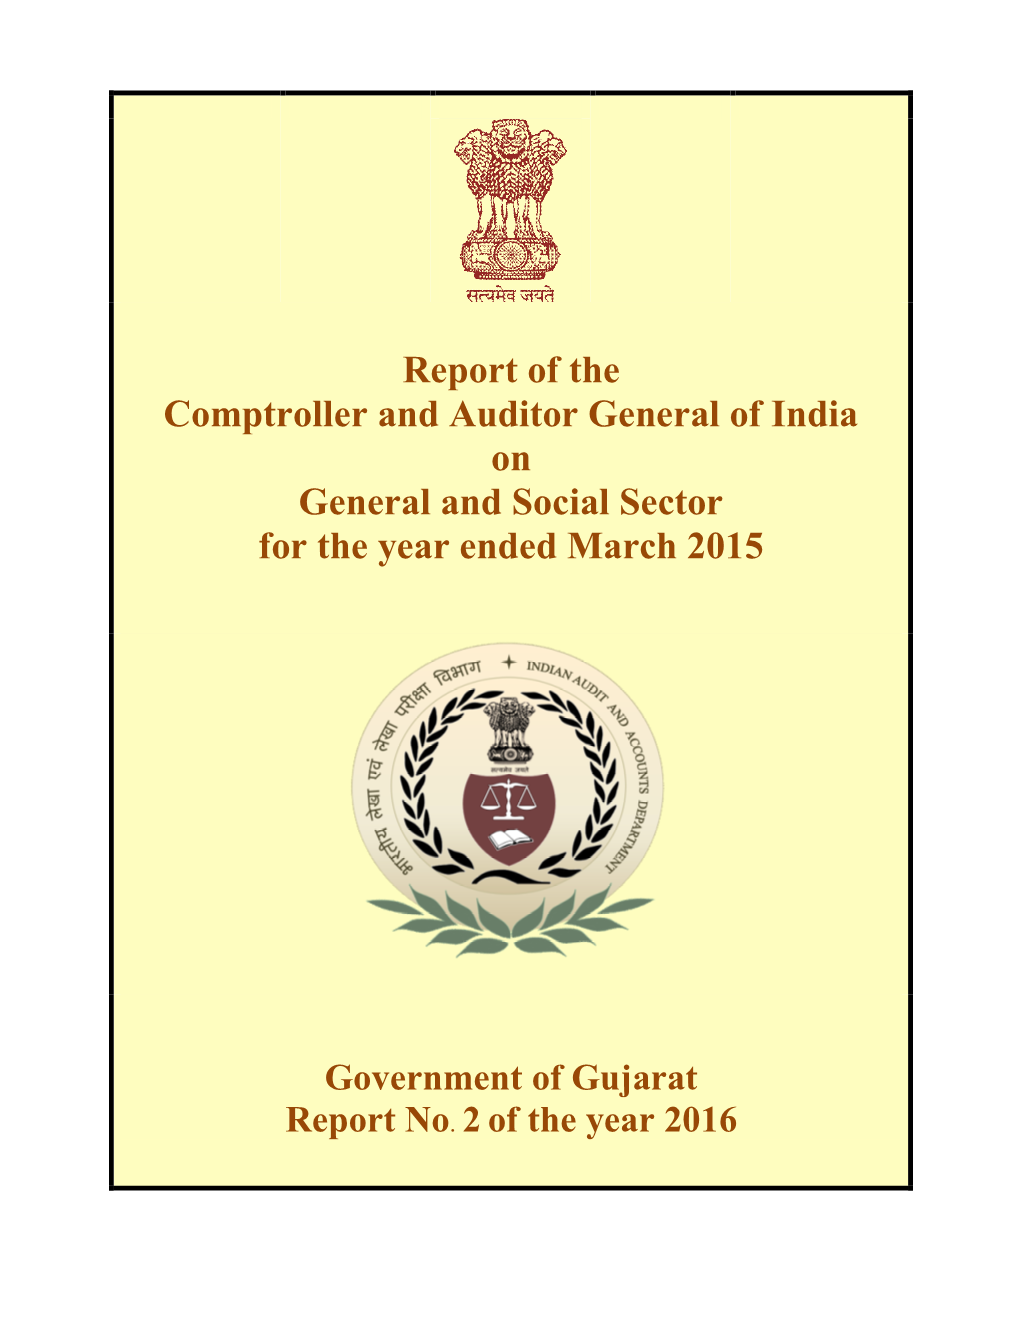 Report of the Comptroller and Auditor General of India on General and Social Sector for the Year Ended March 2015